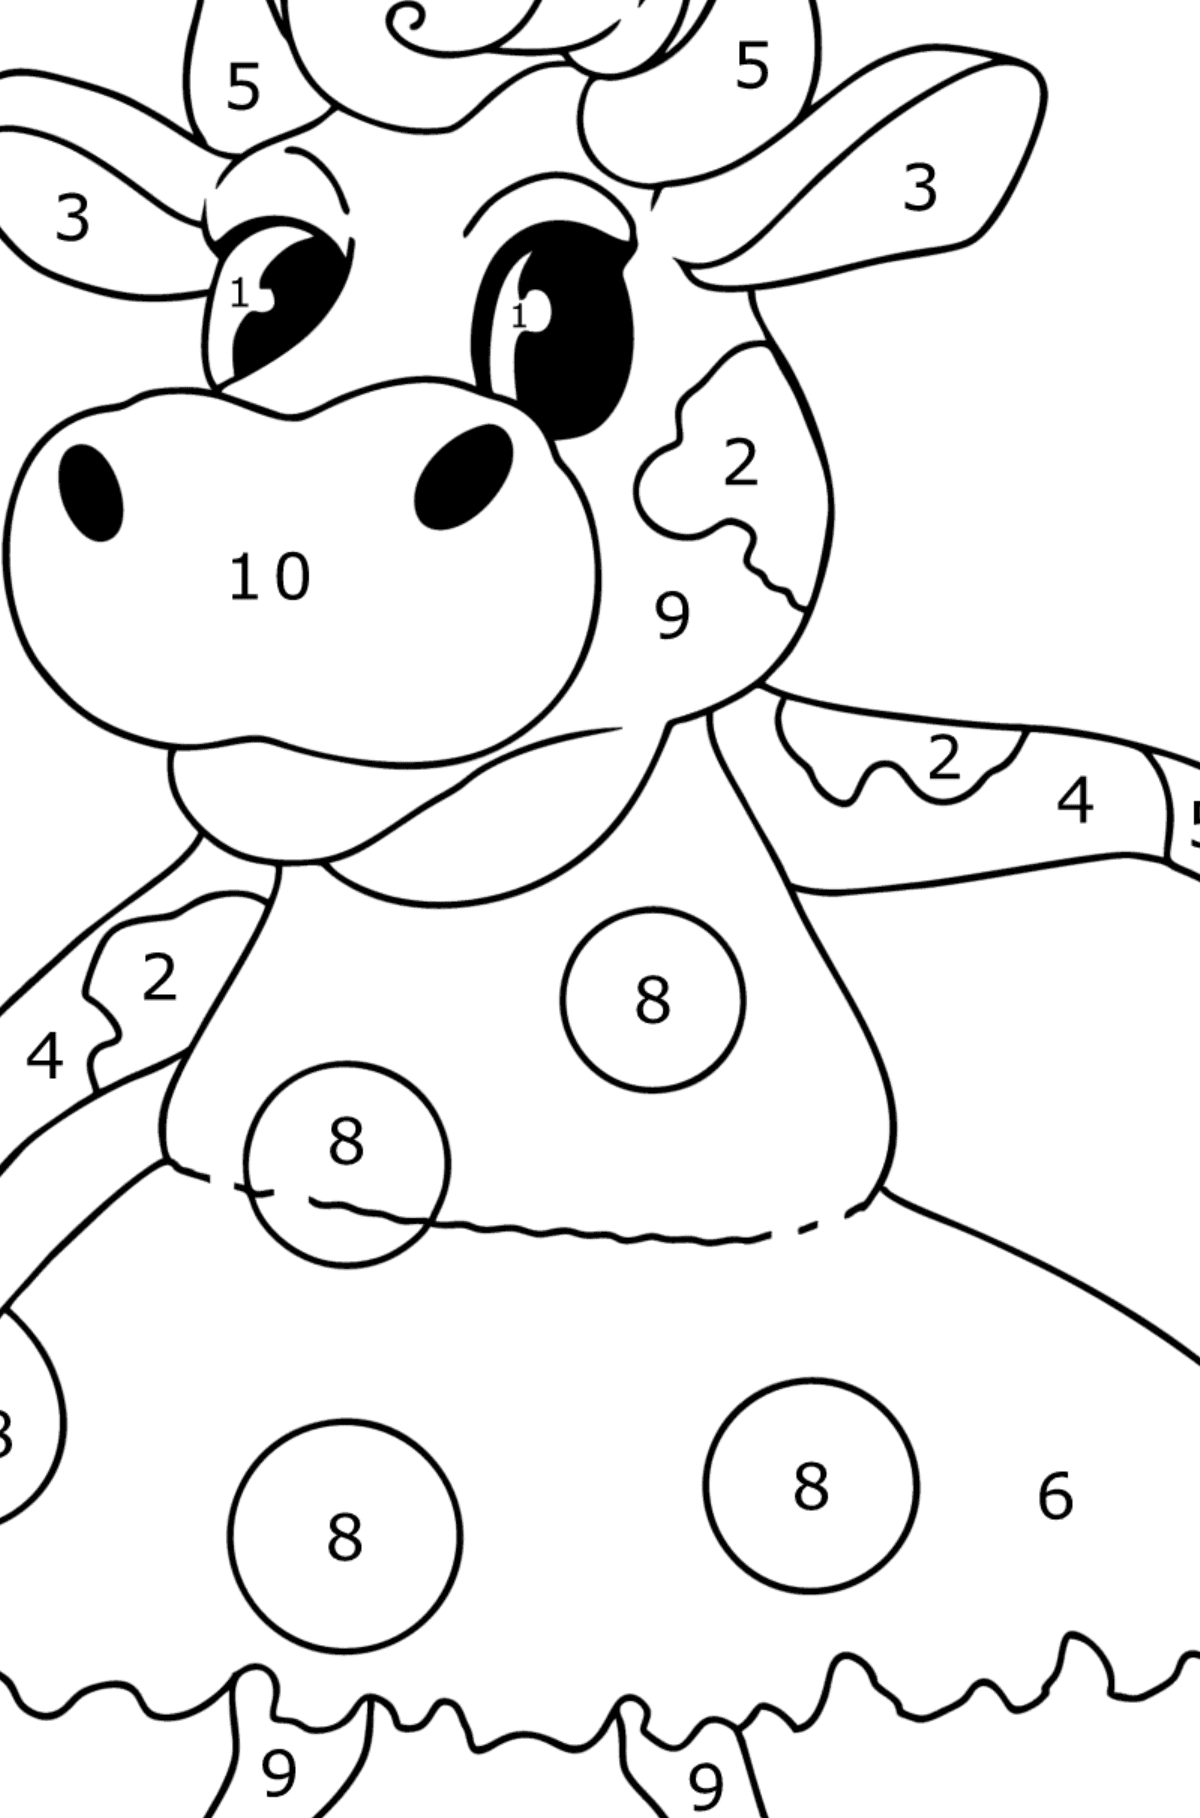 Kawaii cow standing up coloring page - Coloring by Numbers for Kids